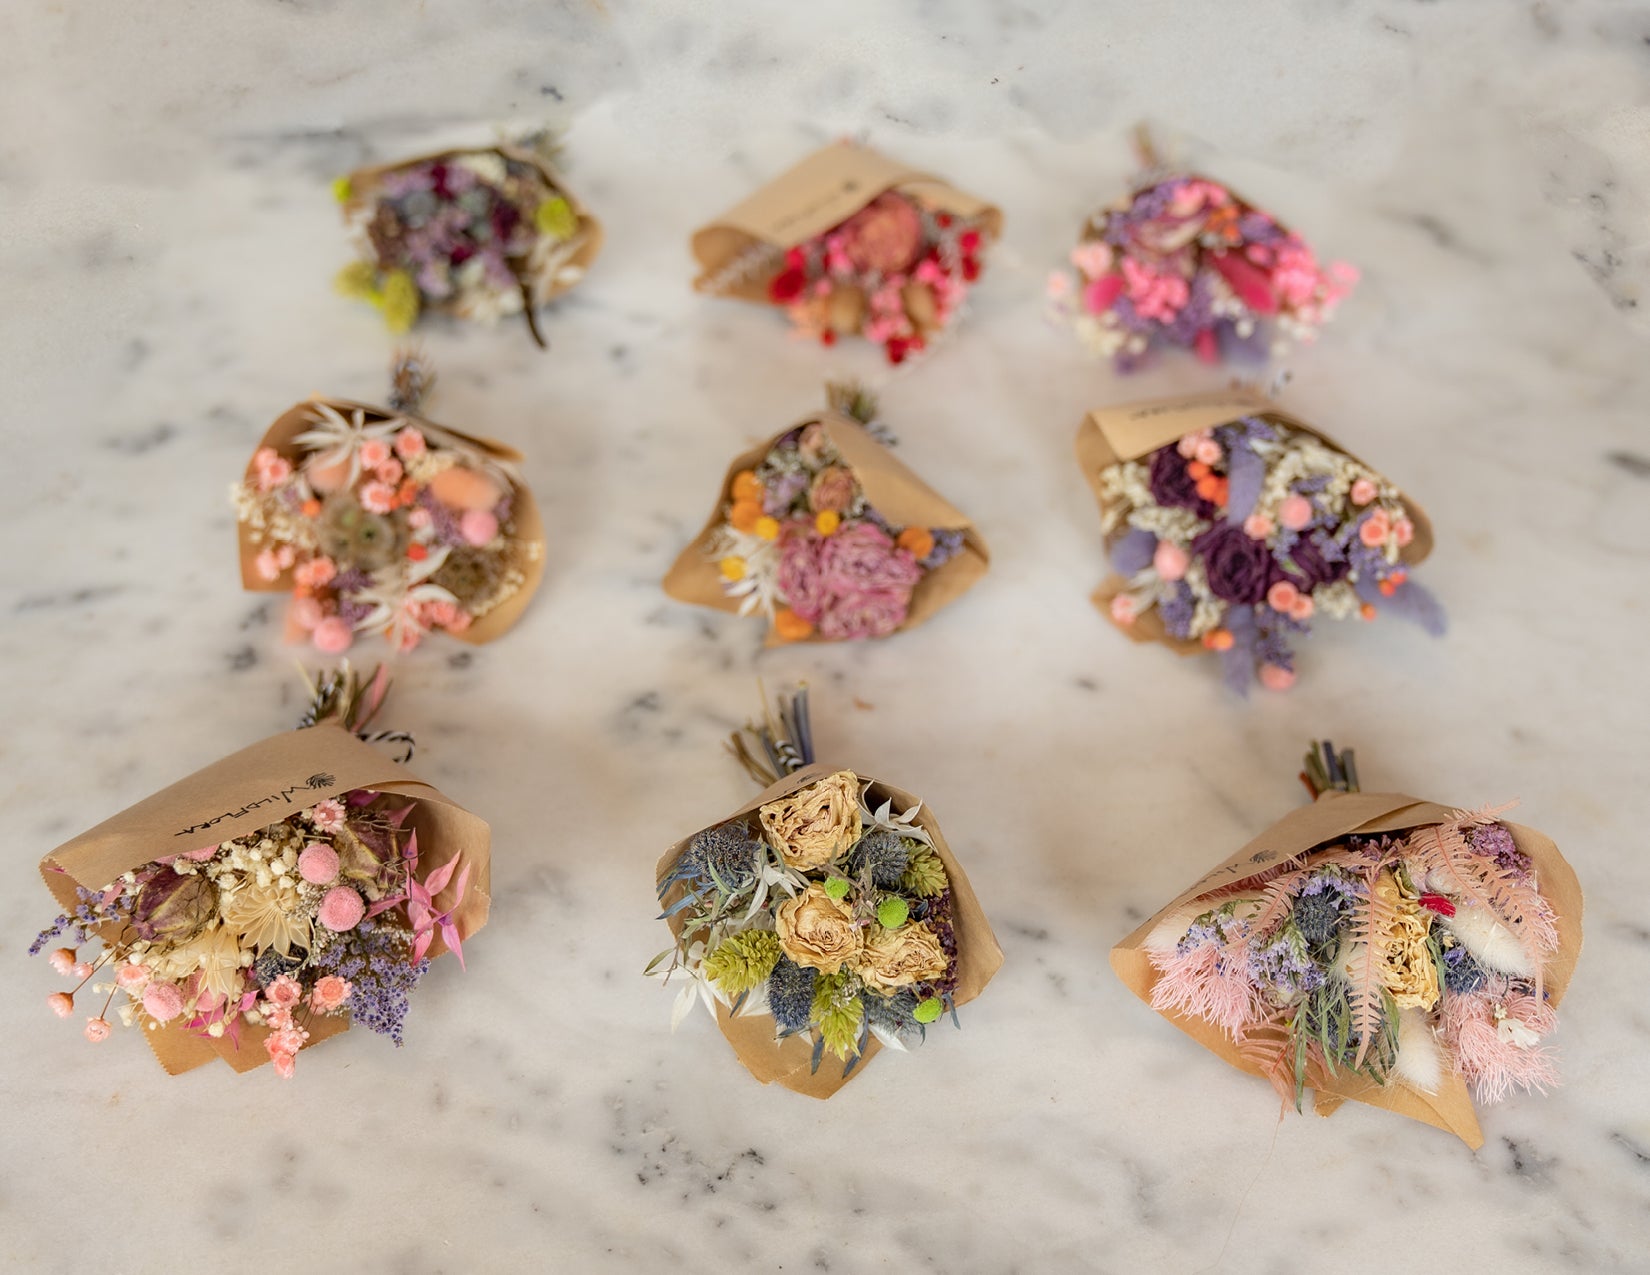 WildFlora mother's day flower alternatives gift present ideas mini tiny little dried bouquets floral flowers wrapped